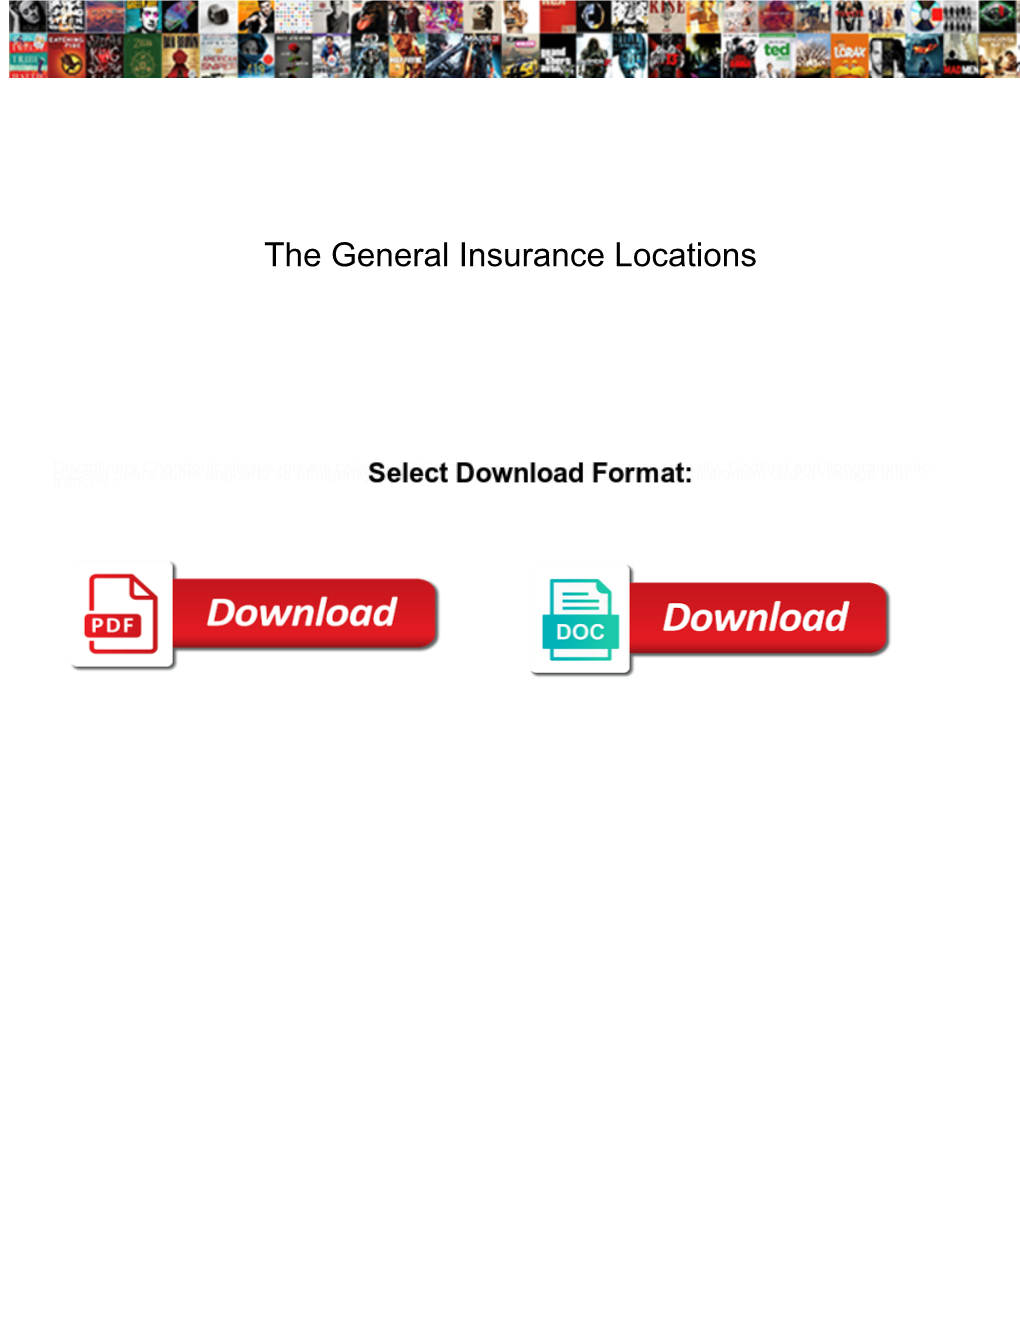 The General Insurance Locations